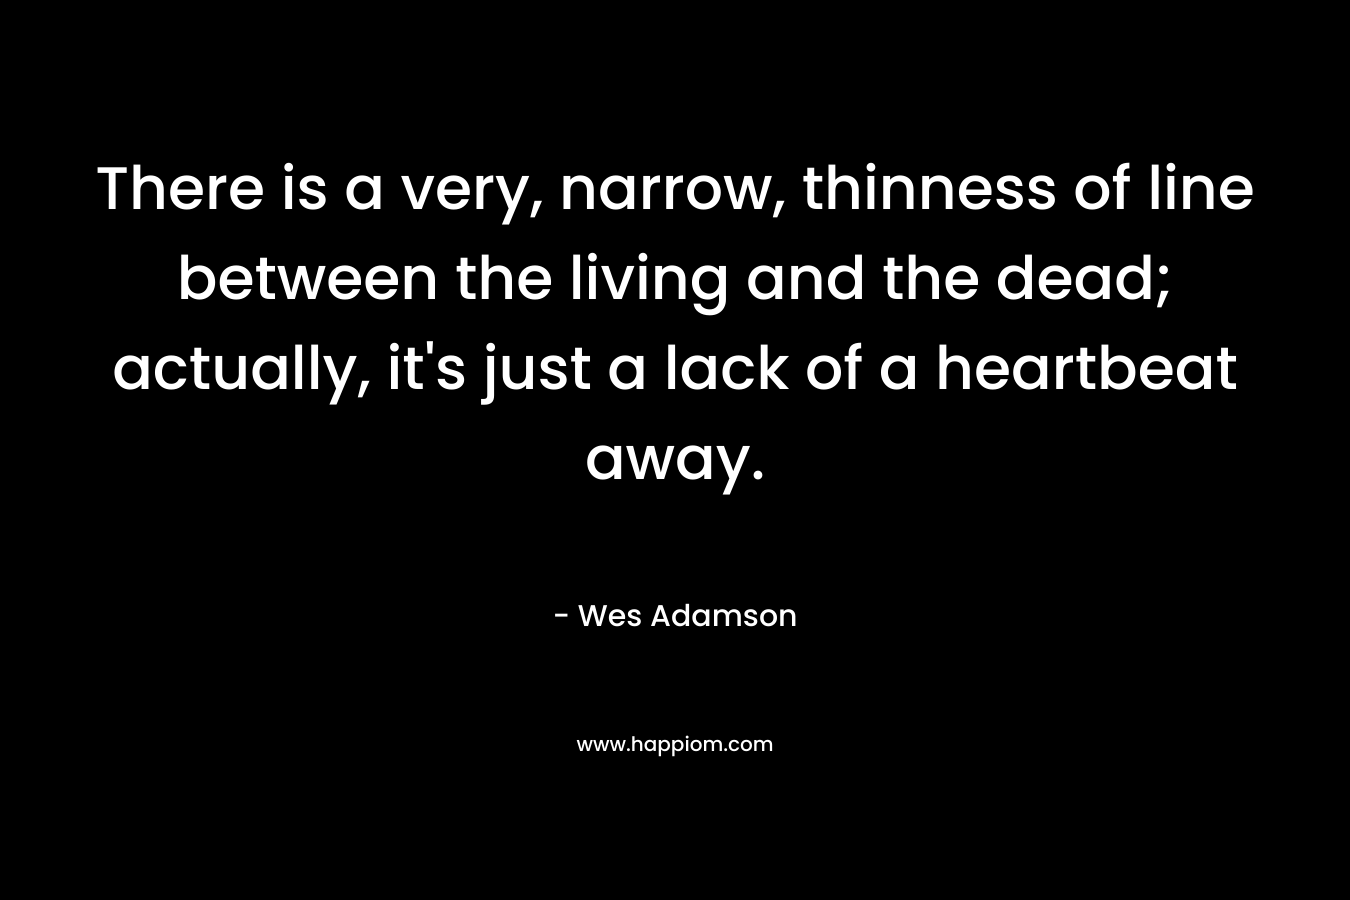 There is a very, narrow, thinness of line between the living and the dead; actually, it's just a lack of a heartbeat away.